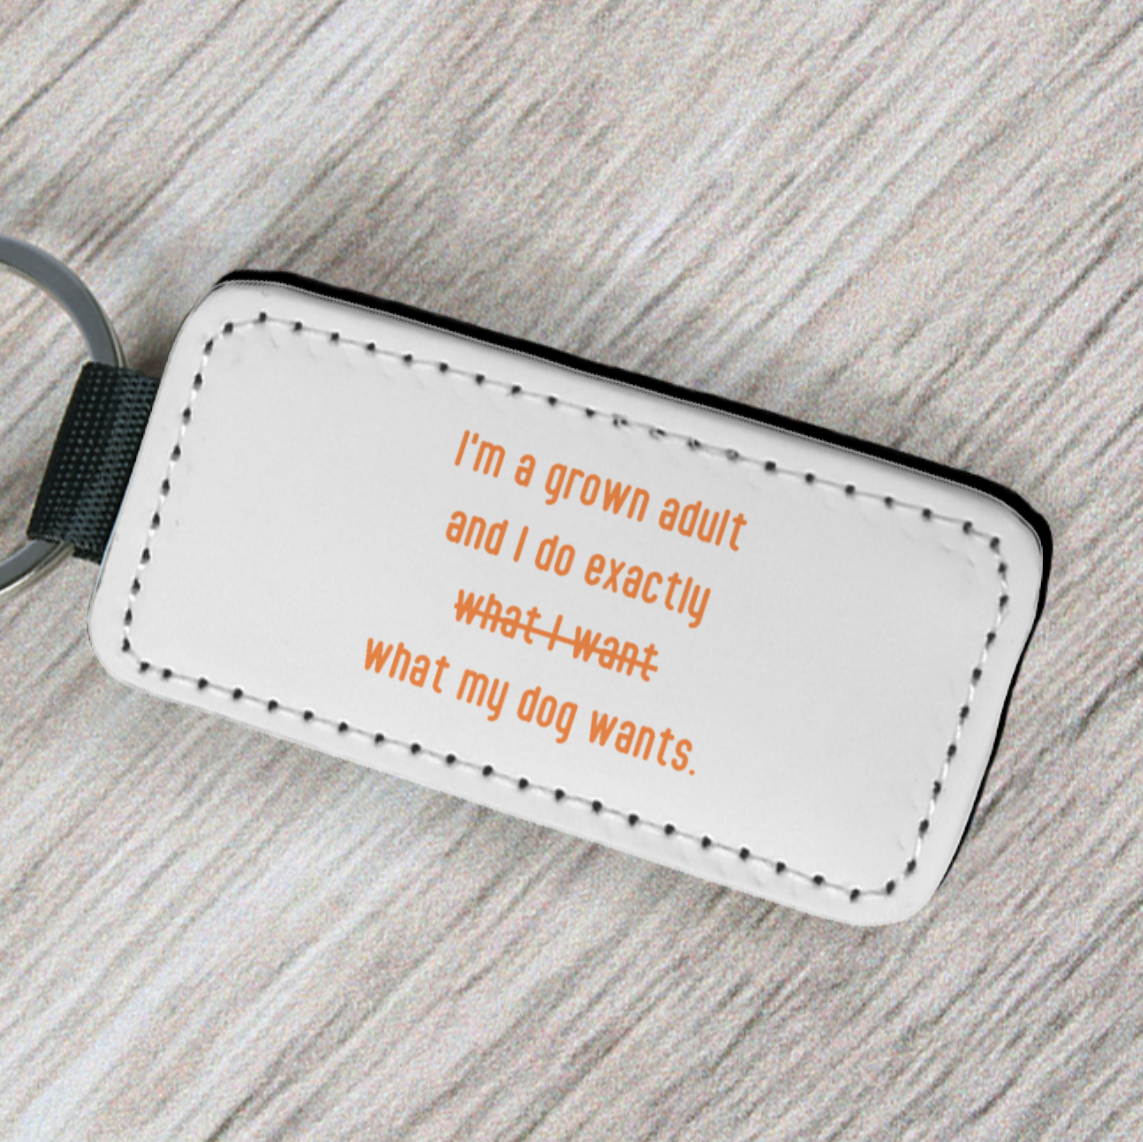 What my dog wants - Key Tag